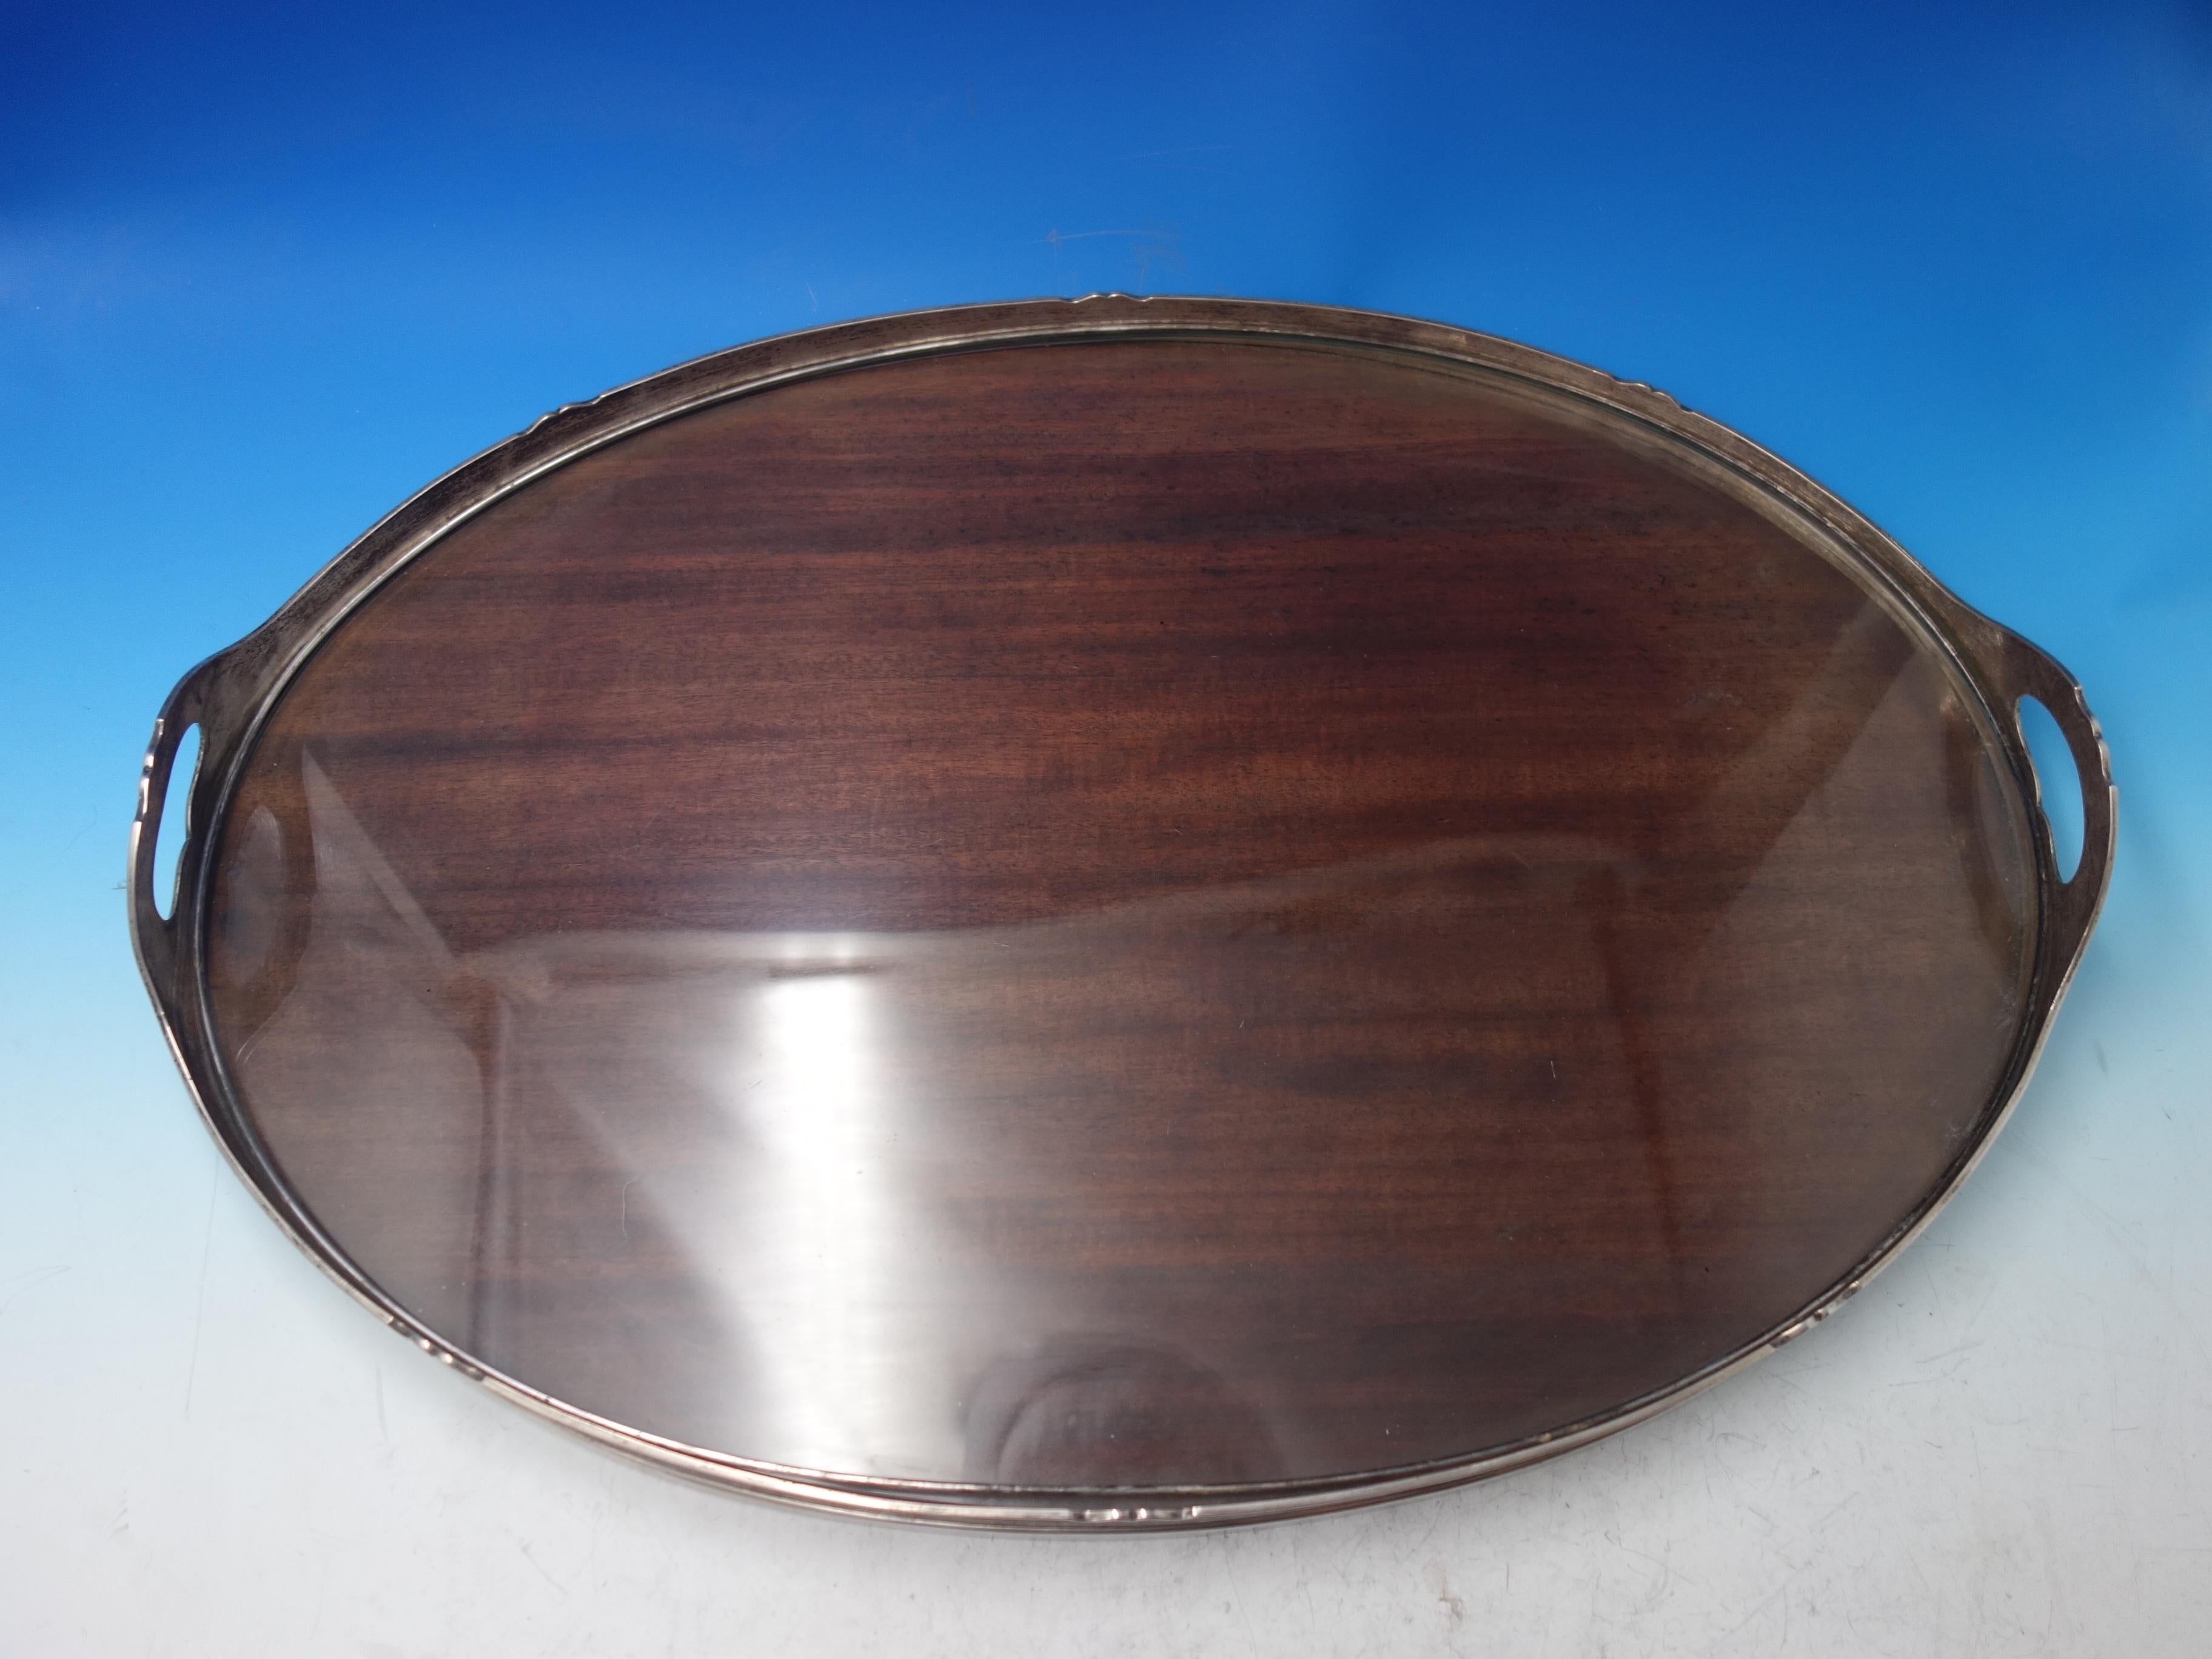 San Lorenzo by Tiffany and Co

Shreve sterling frame gallery tray with wooden center and glass top, measuring 24